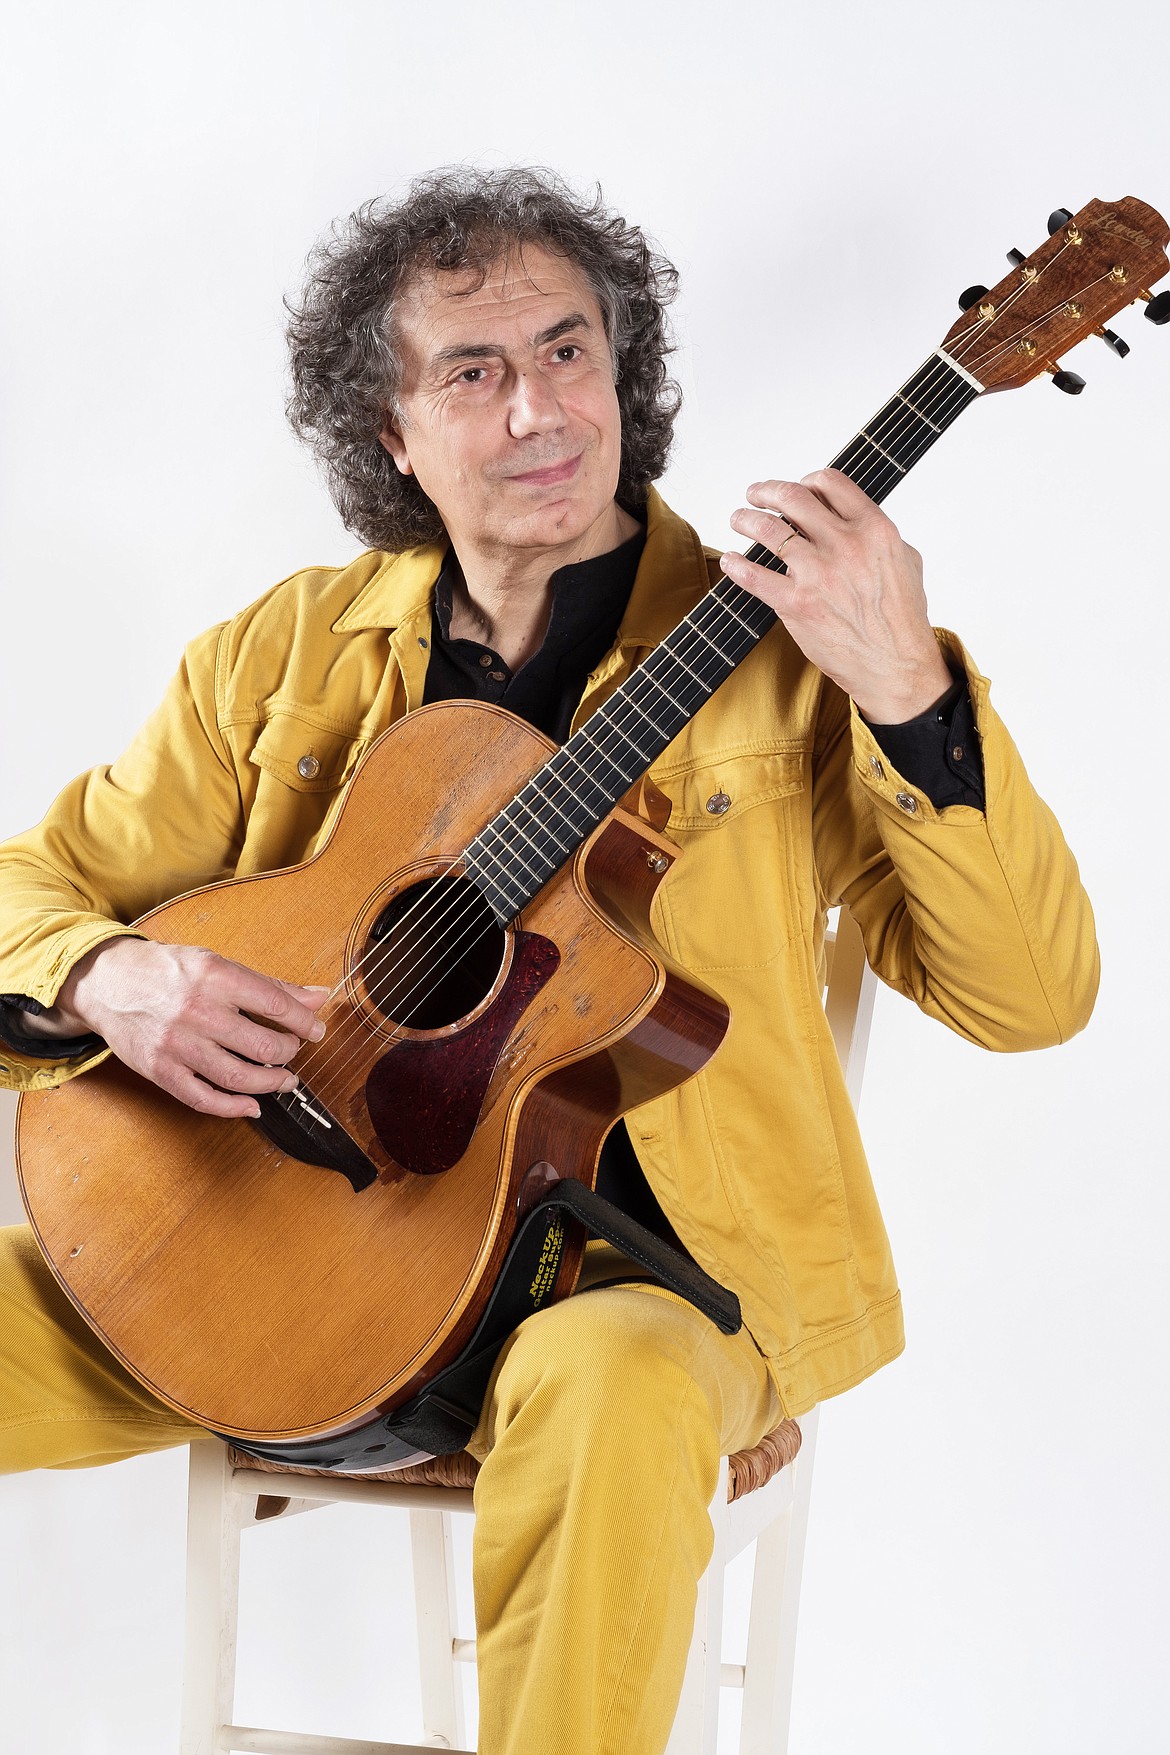 Pierre Bensusan, pictured, will visit North Central Washington for a series of free concerts, including Moses Lake Wednesday and Cave B Winery near Quincy Saturday. The French guitarist lives in Paris and is traveling to promote his album that came out just before the pandemic began.